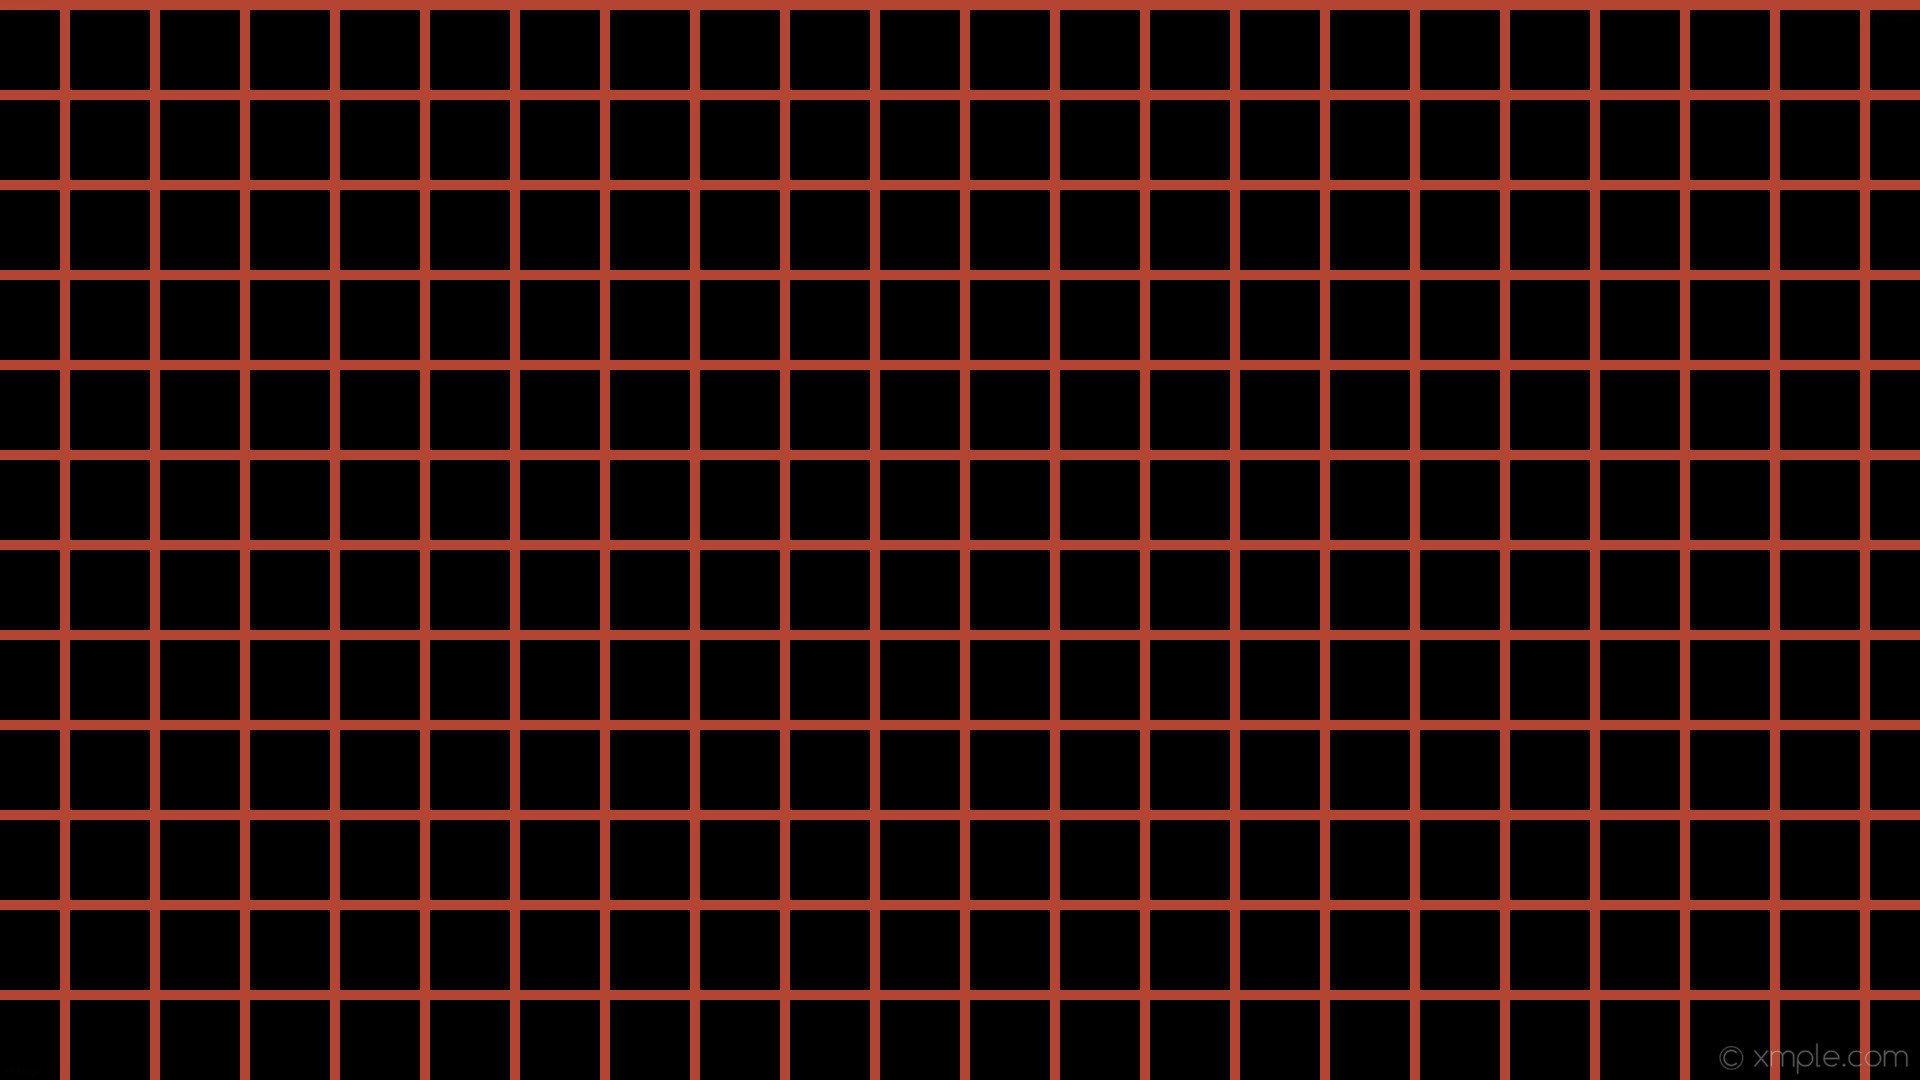 A black and red checkered background - Grid